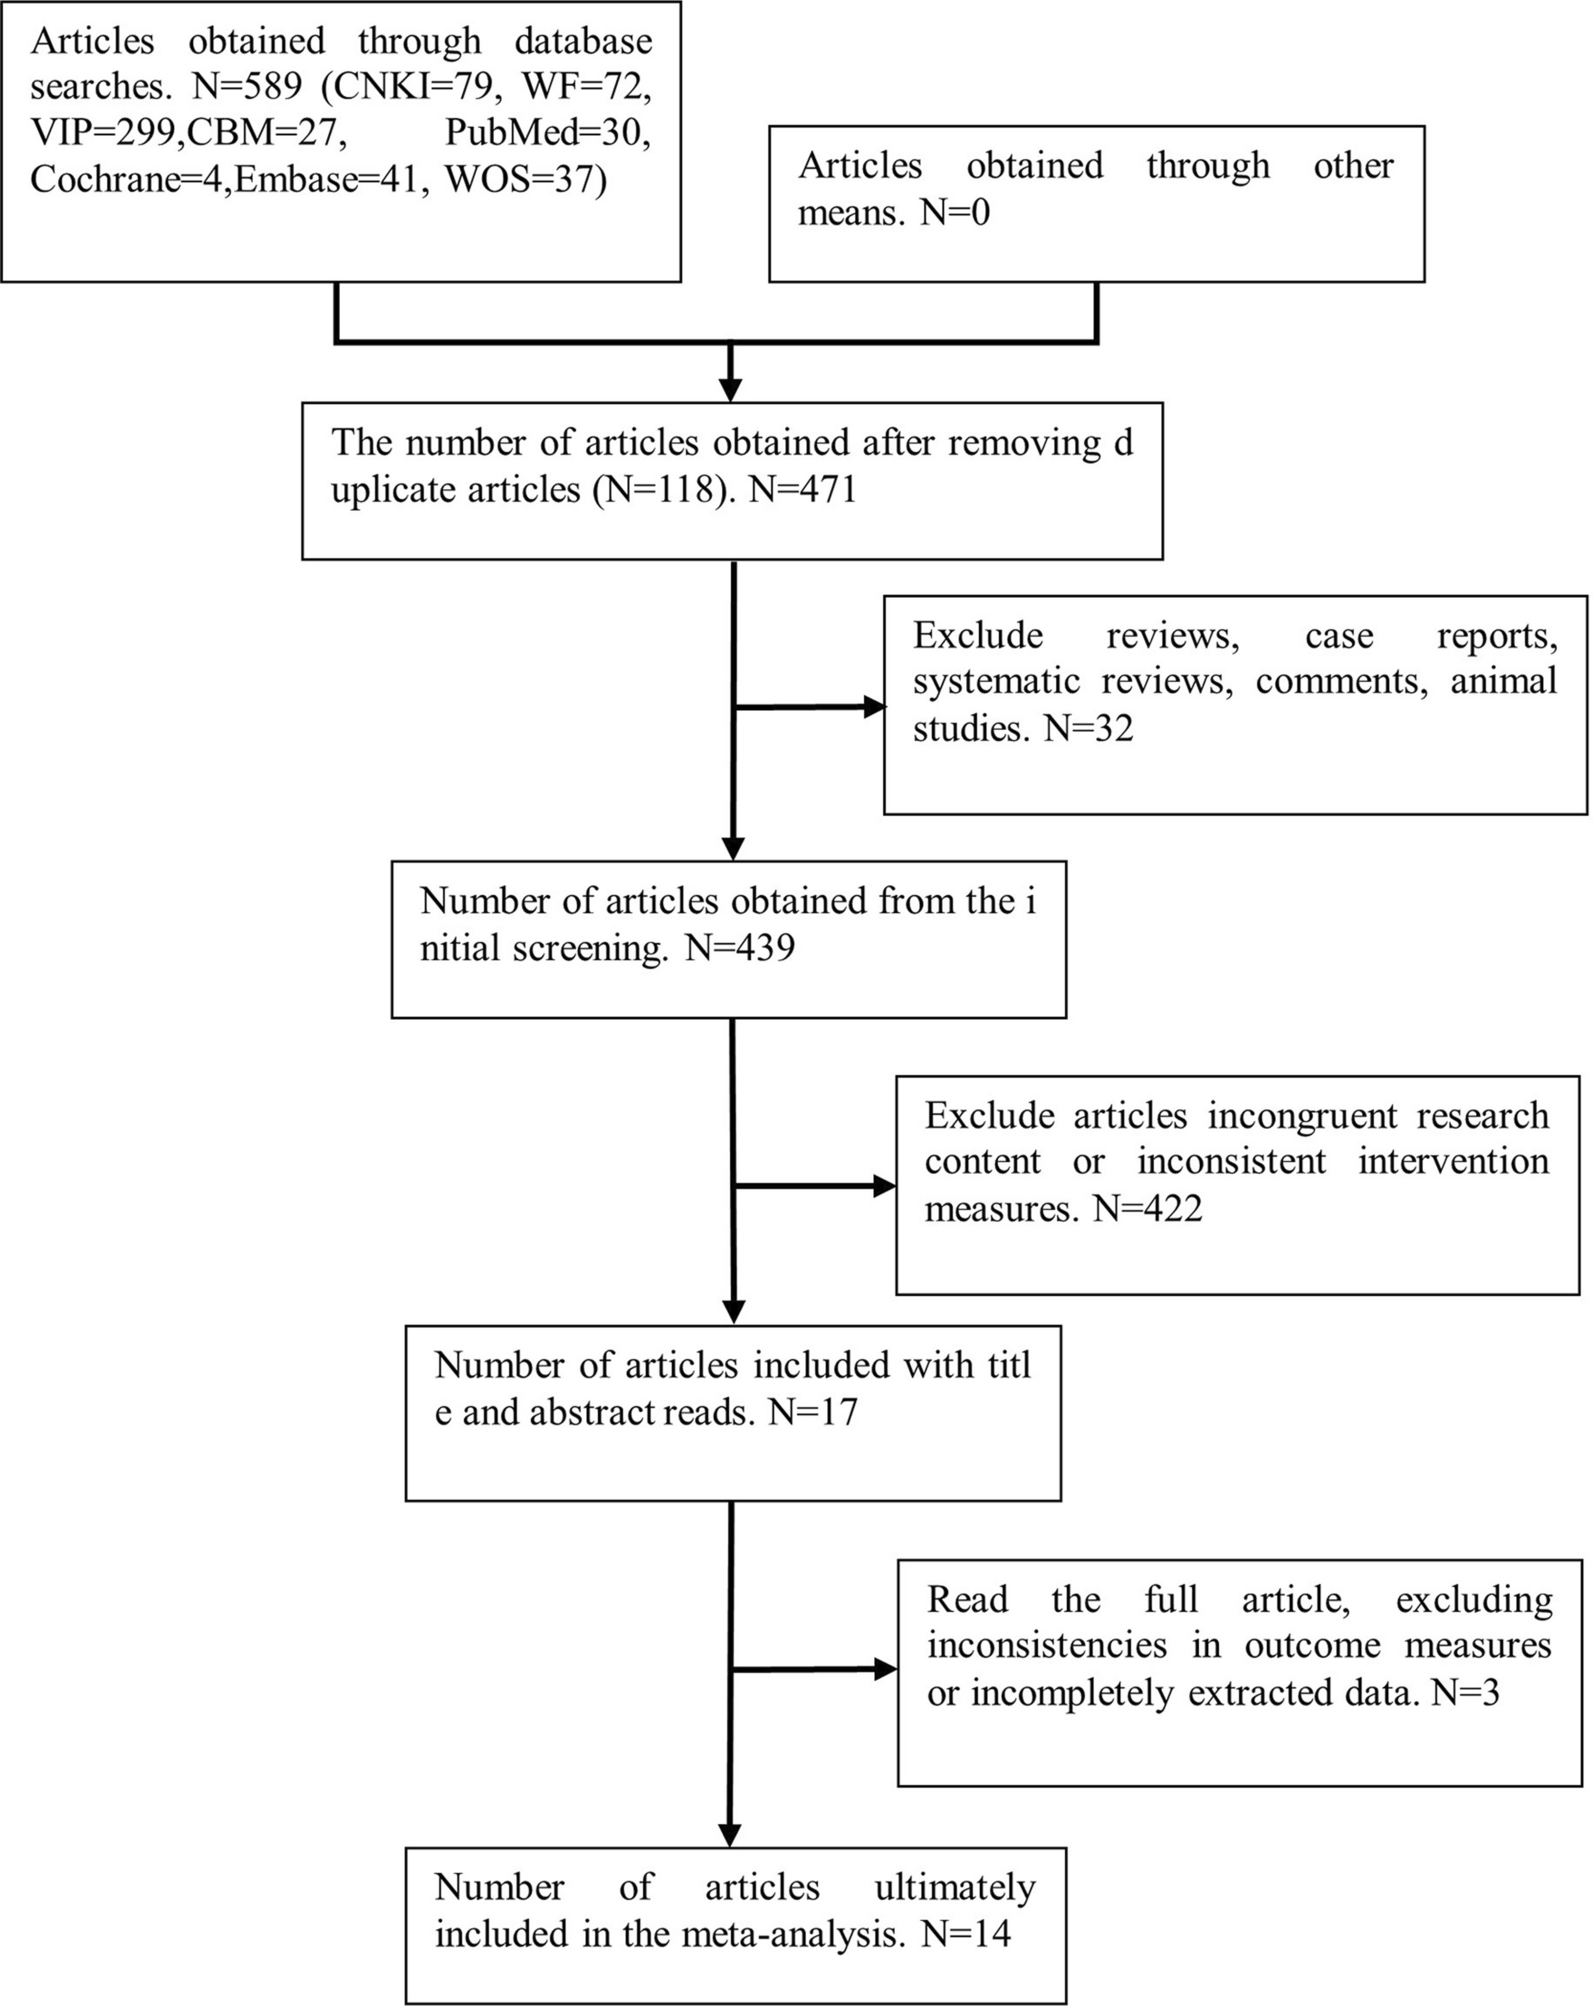 Meta-analysis of the efficacy and safety of OLIF and TLIF in the treatment of degenerative lumbar spondylolisthesis